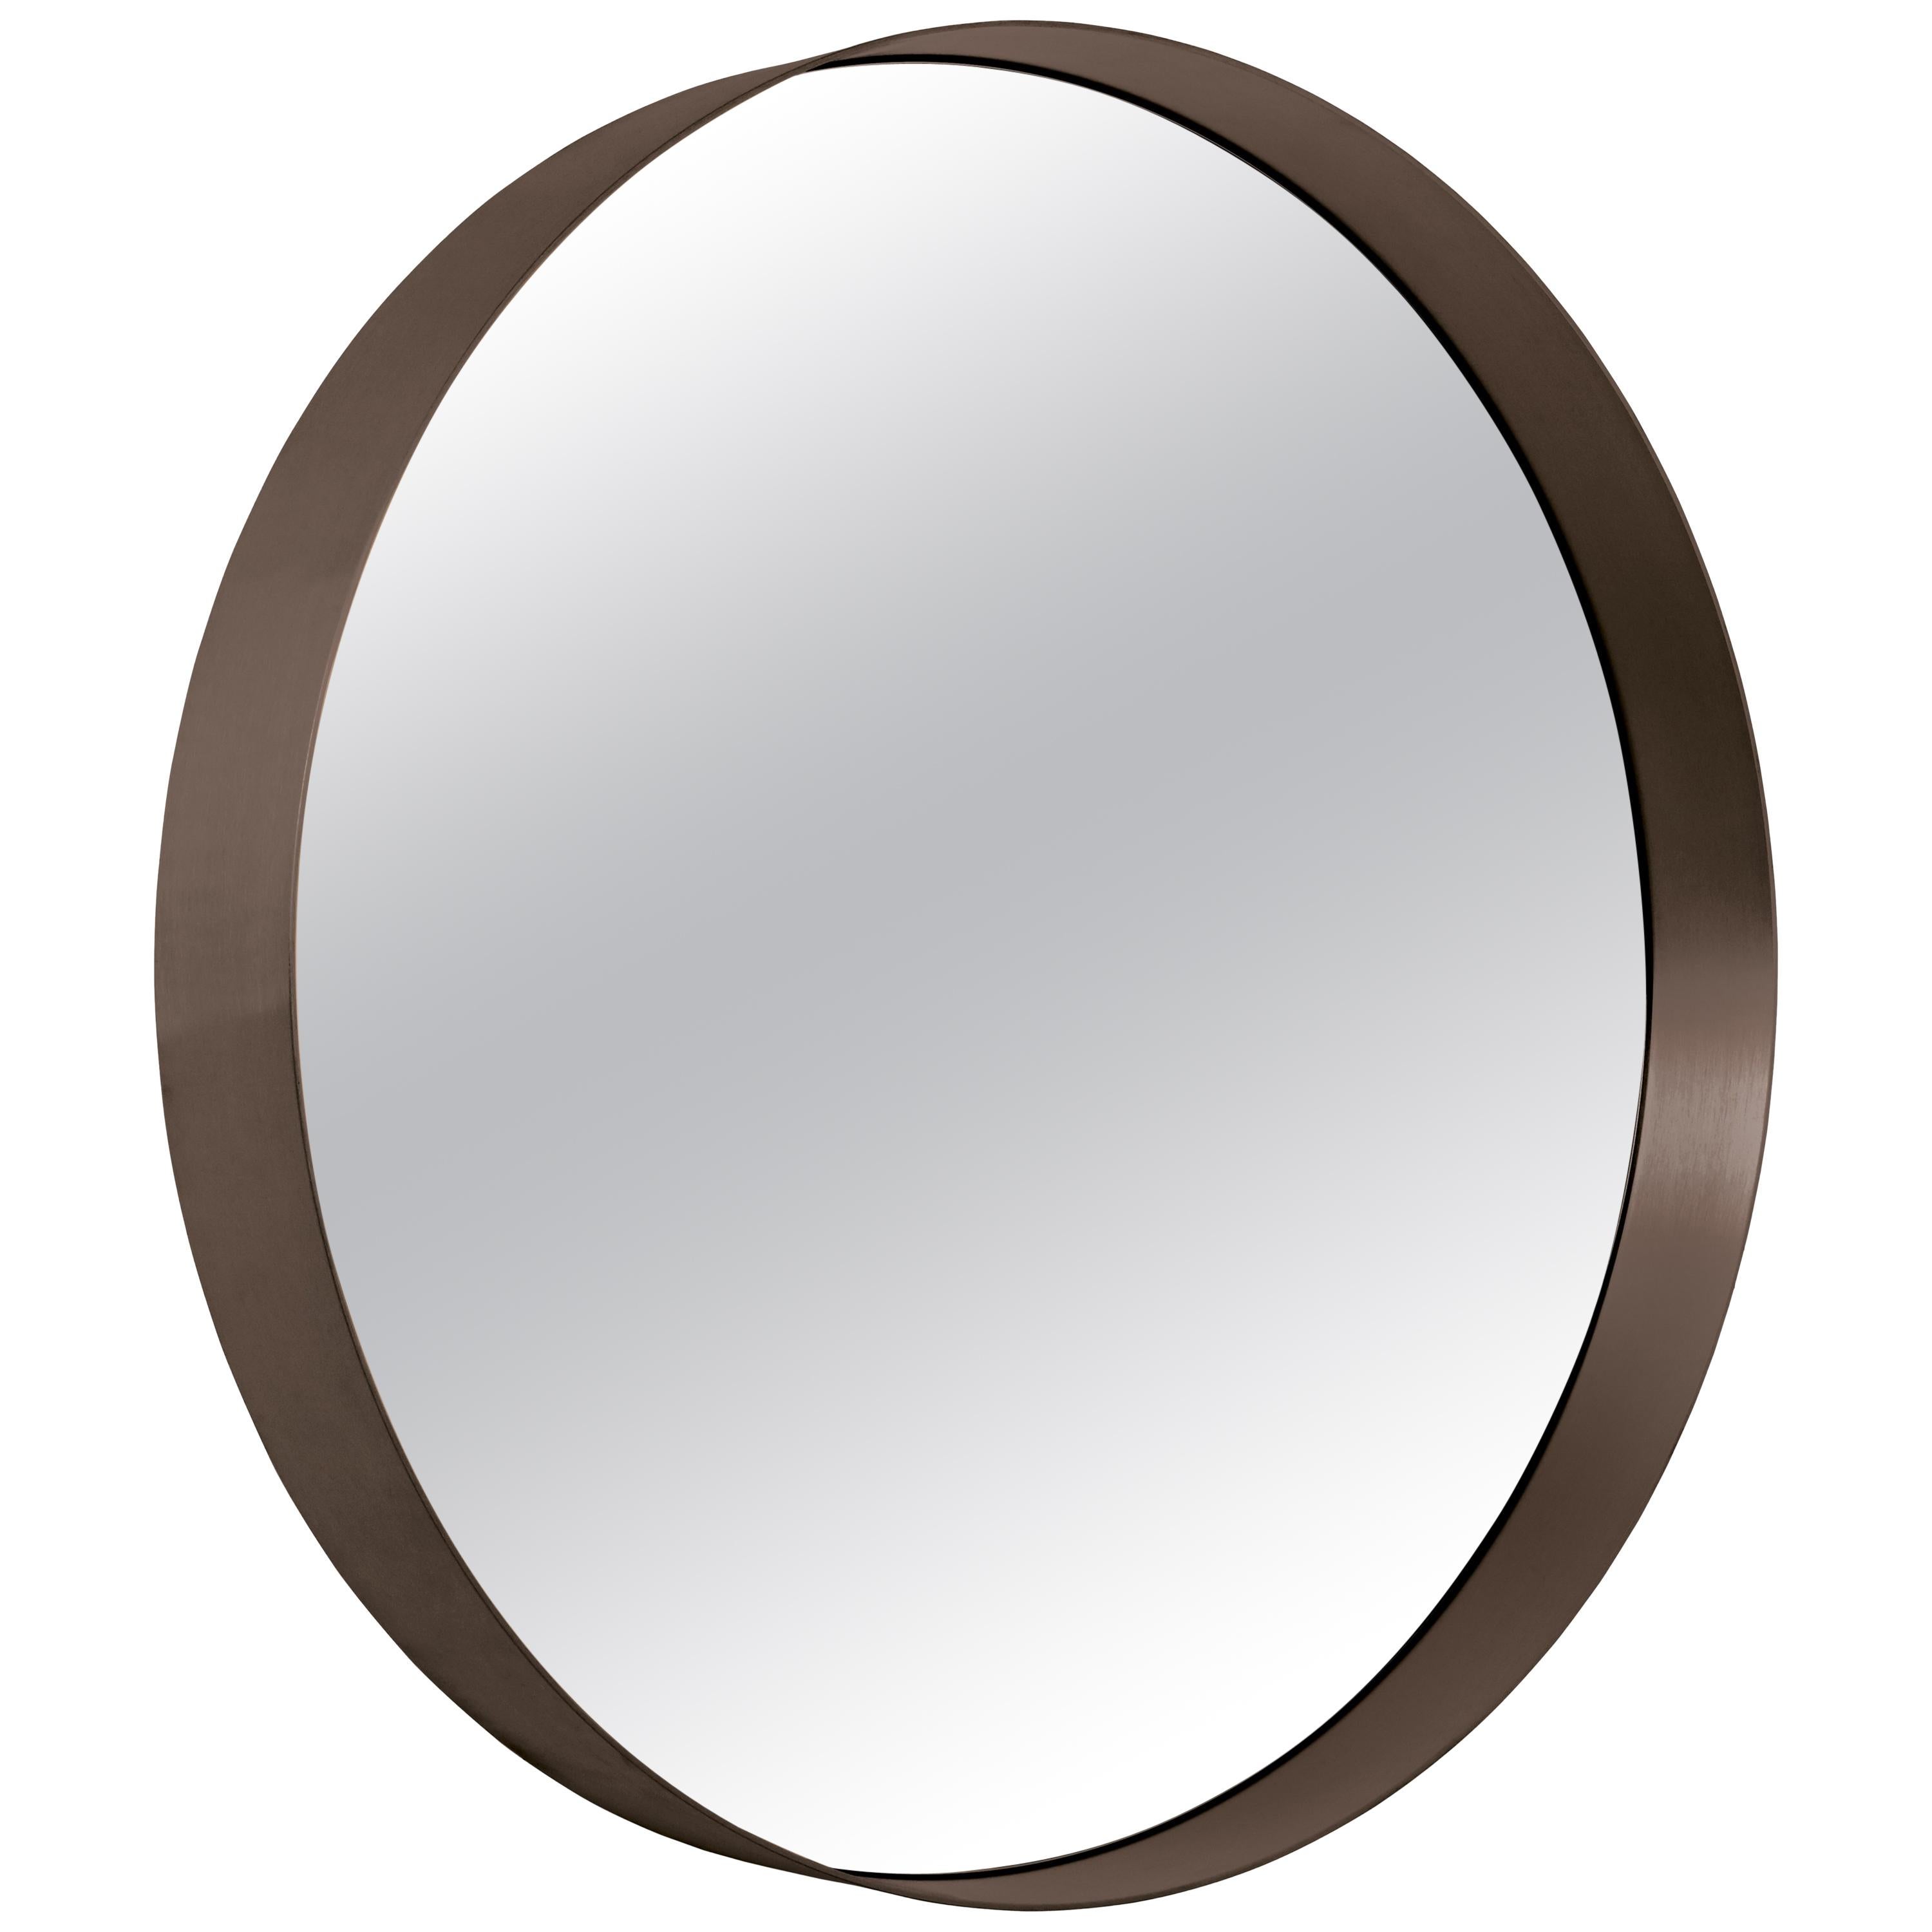 ClassiCon Cypris Round Mirror in Burnished Brass and Smoked Glass by Nina Mair